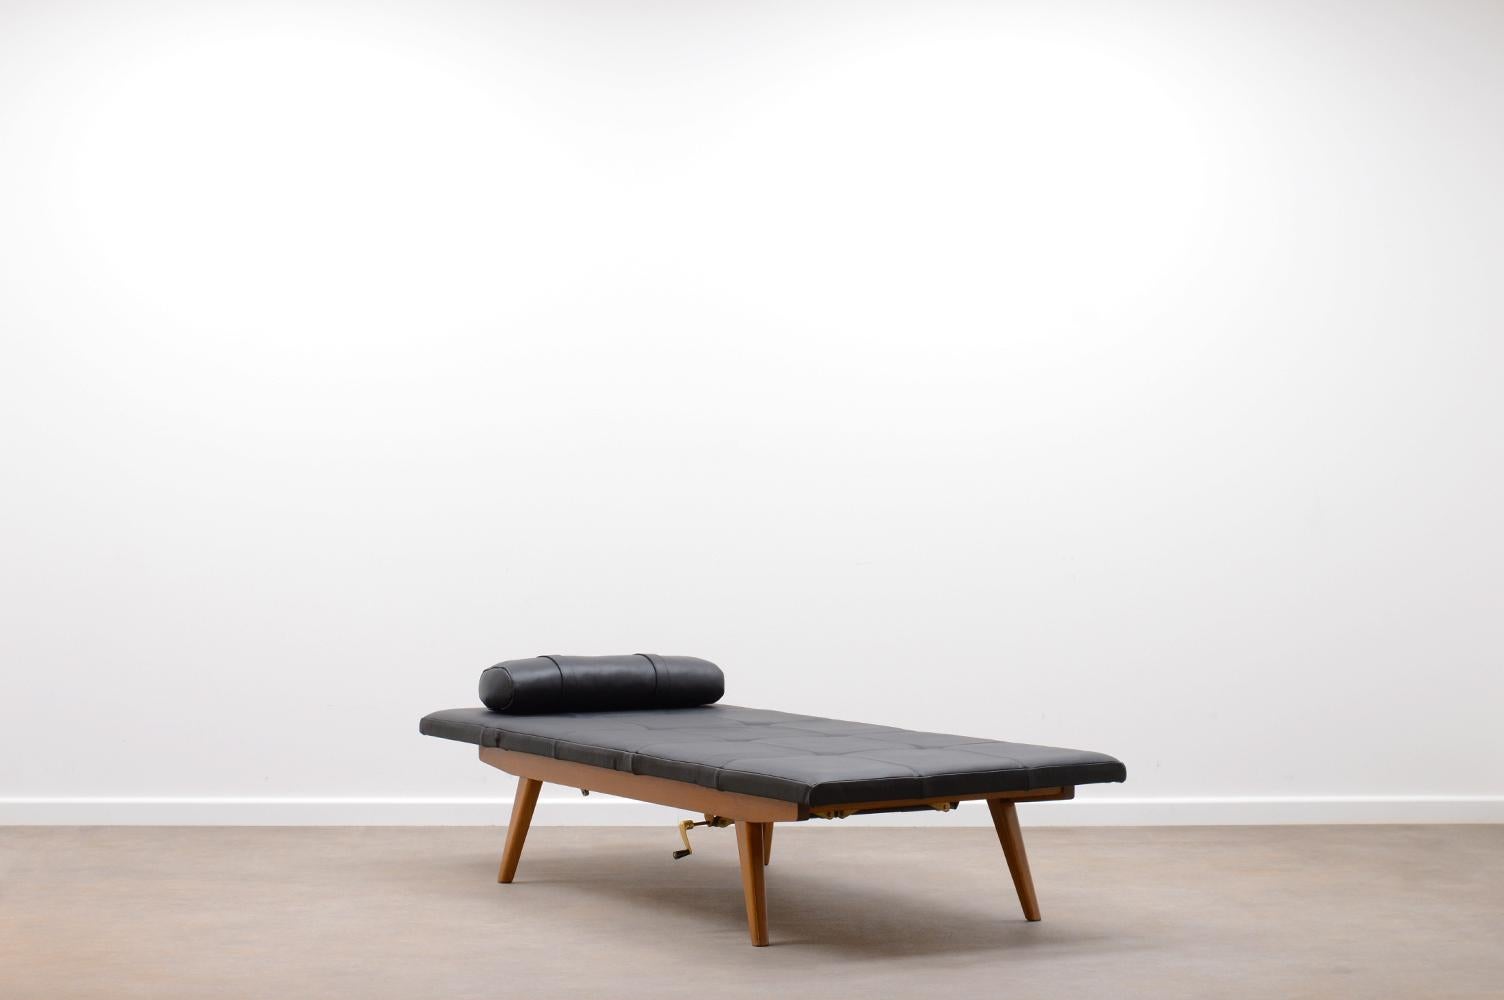 Adjustable daybed by Adolf Wrenger for Lemgo, Germany 50s. Wooden frame in classic 50s design. Reupholstered black leather cushion and fixed mattres in patchwork. Head and feet are separately adjustable. In very good vintage conditions. 

